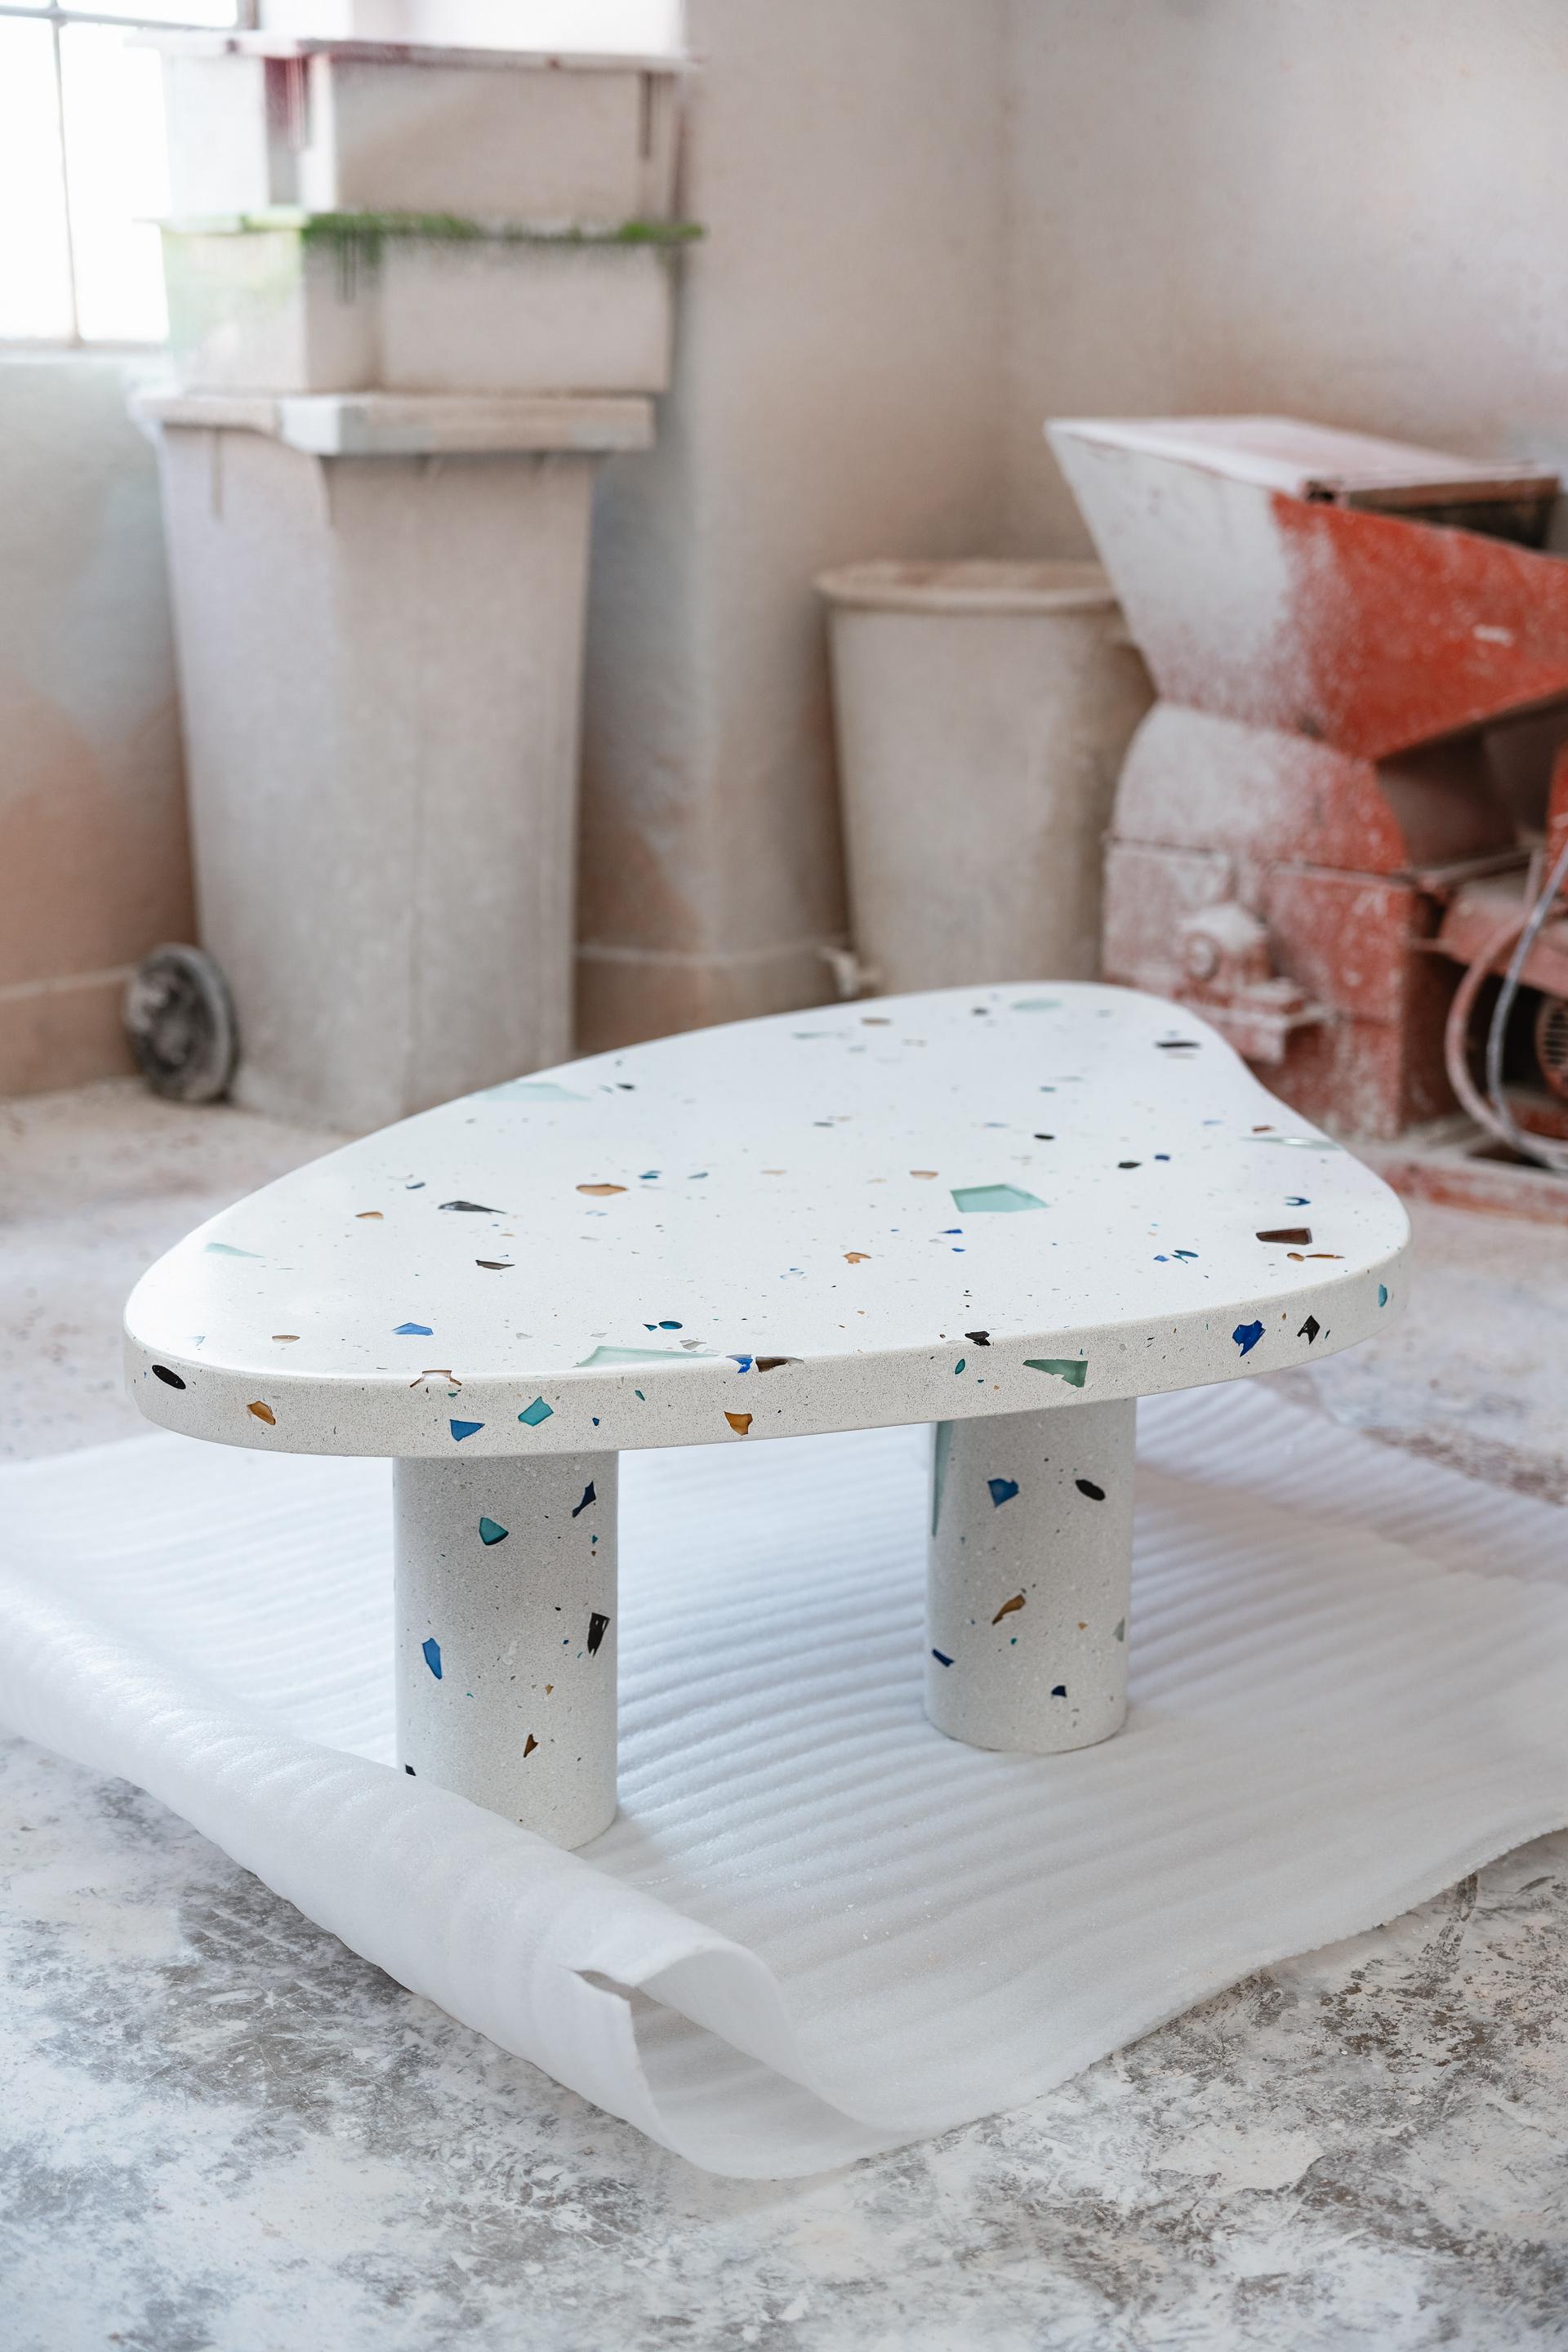 The Mono Coffee Grande Table takes part of the MONOMORFO collection. The terrazzo composition is made of leftover glass crystals from a glass crystal factory in Minas Gerais, Brazil. This leftover material contributes to the creation of unique and